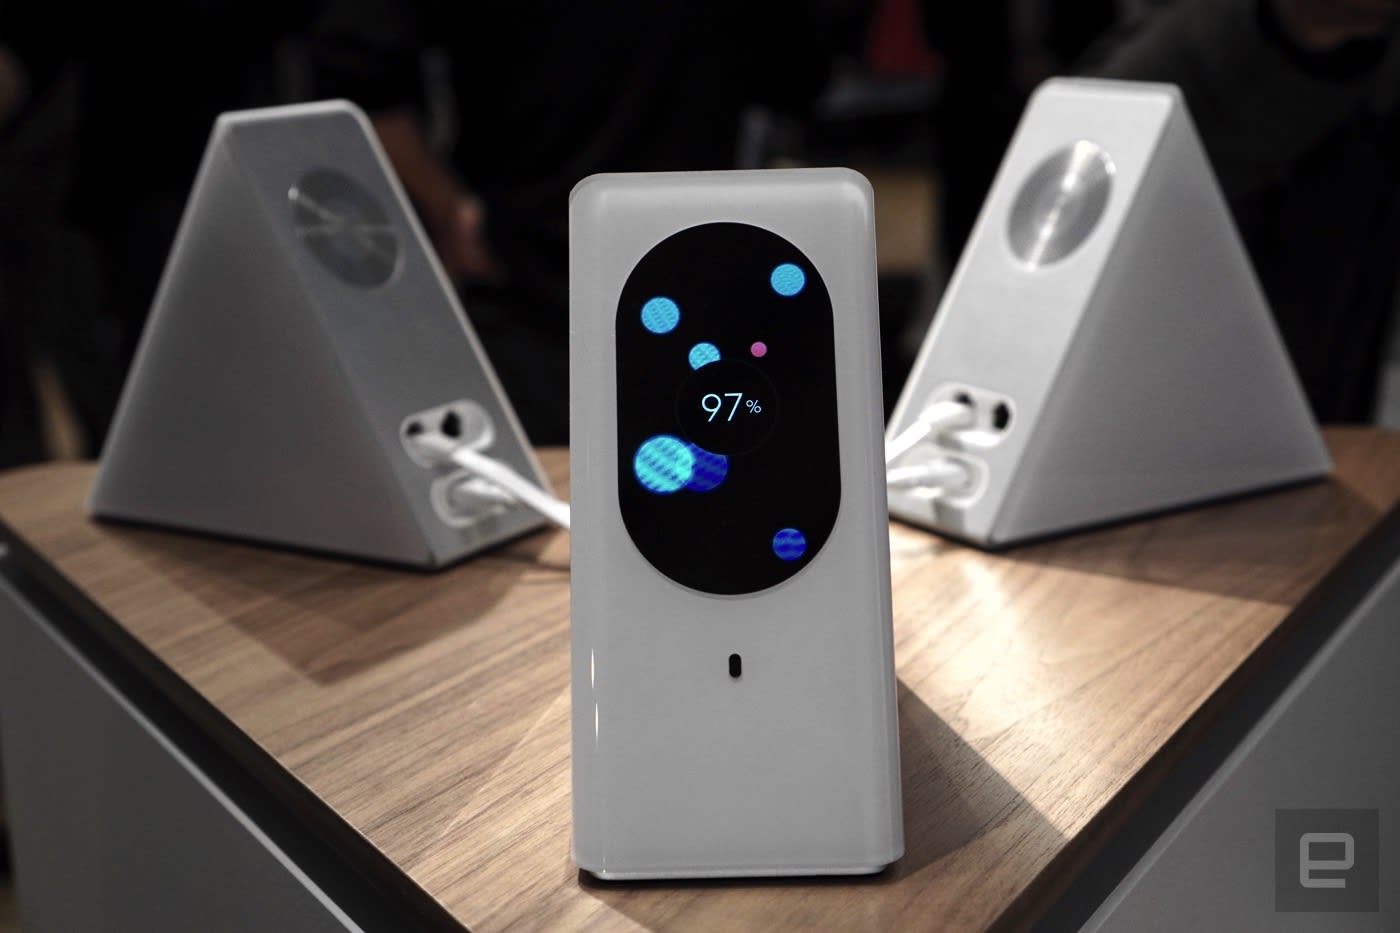 Starry's Station aims to be the smartest, prettiest WiFi router around